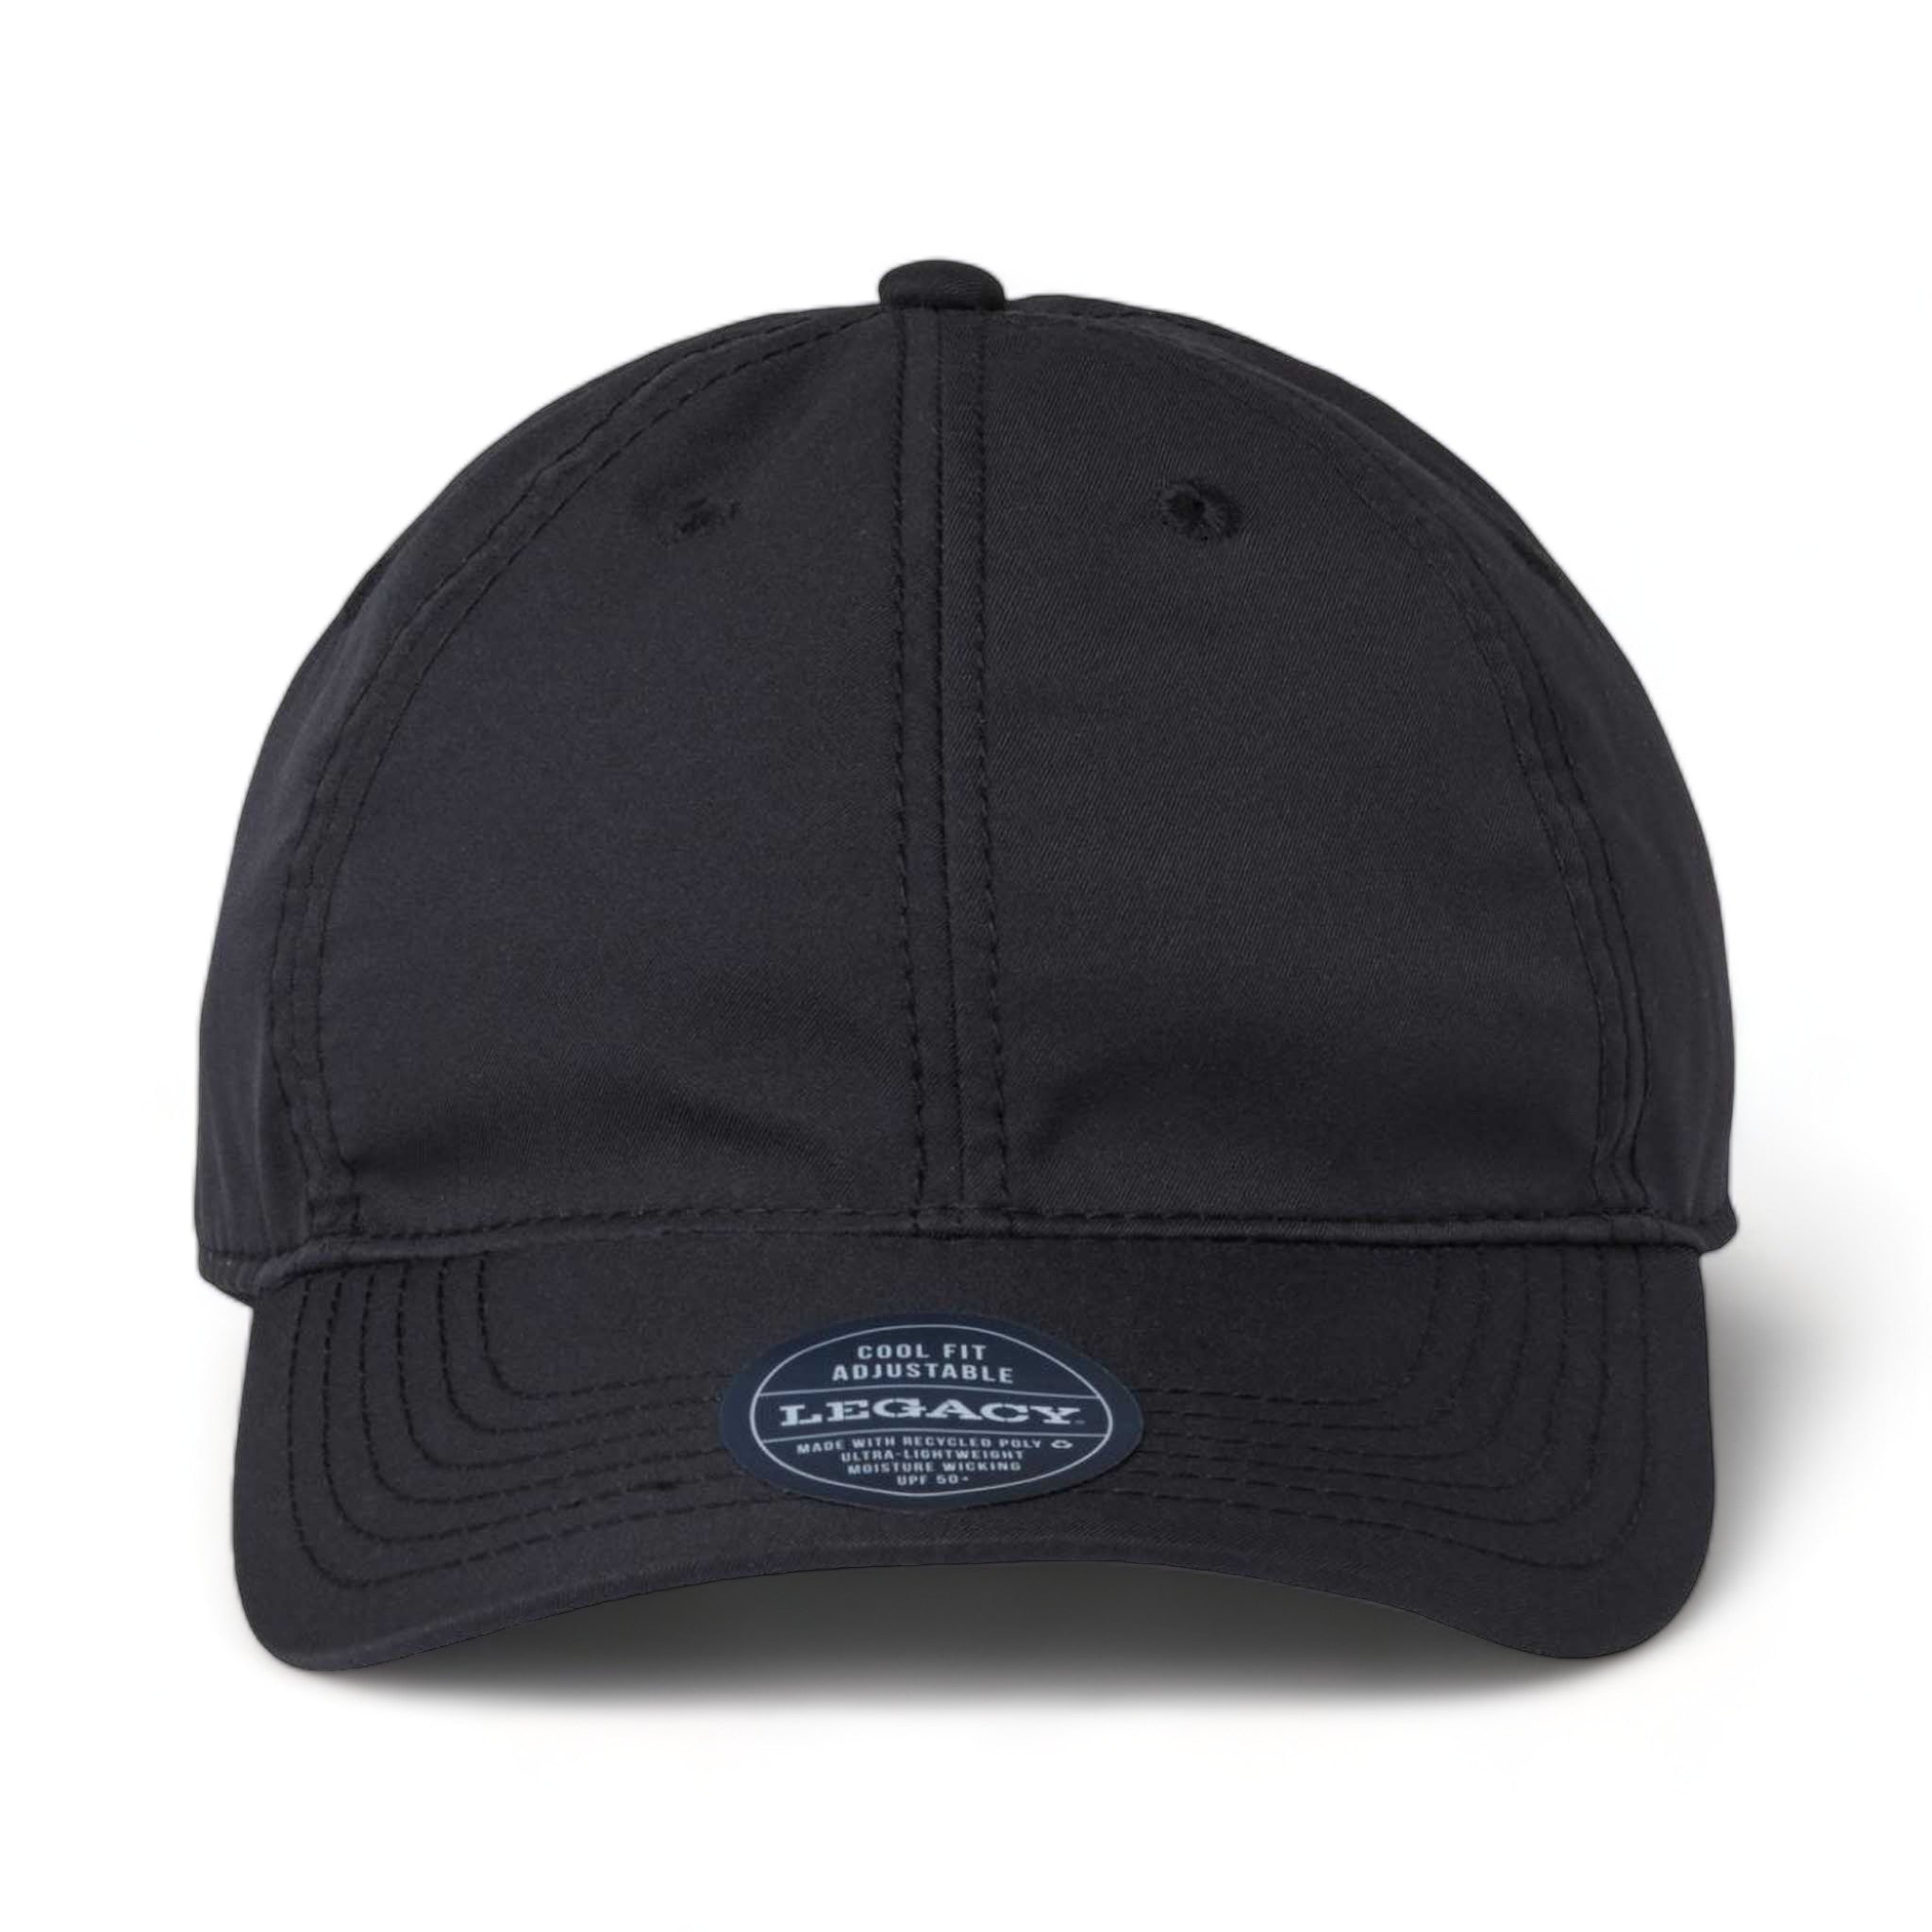 Front view of LEGACY CFA custom hat in black